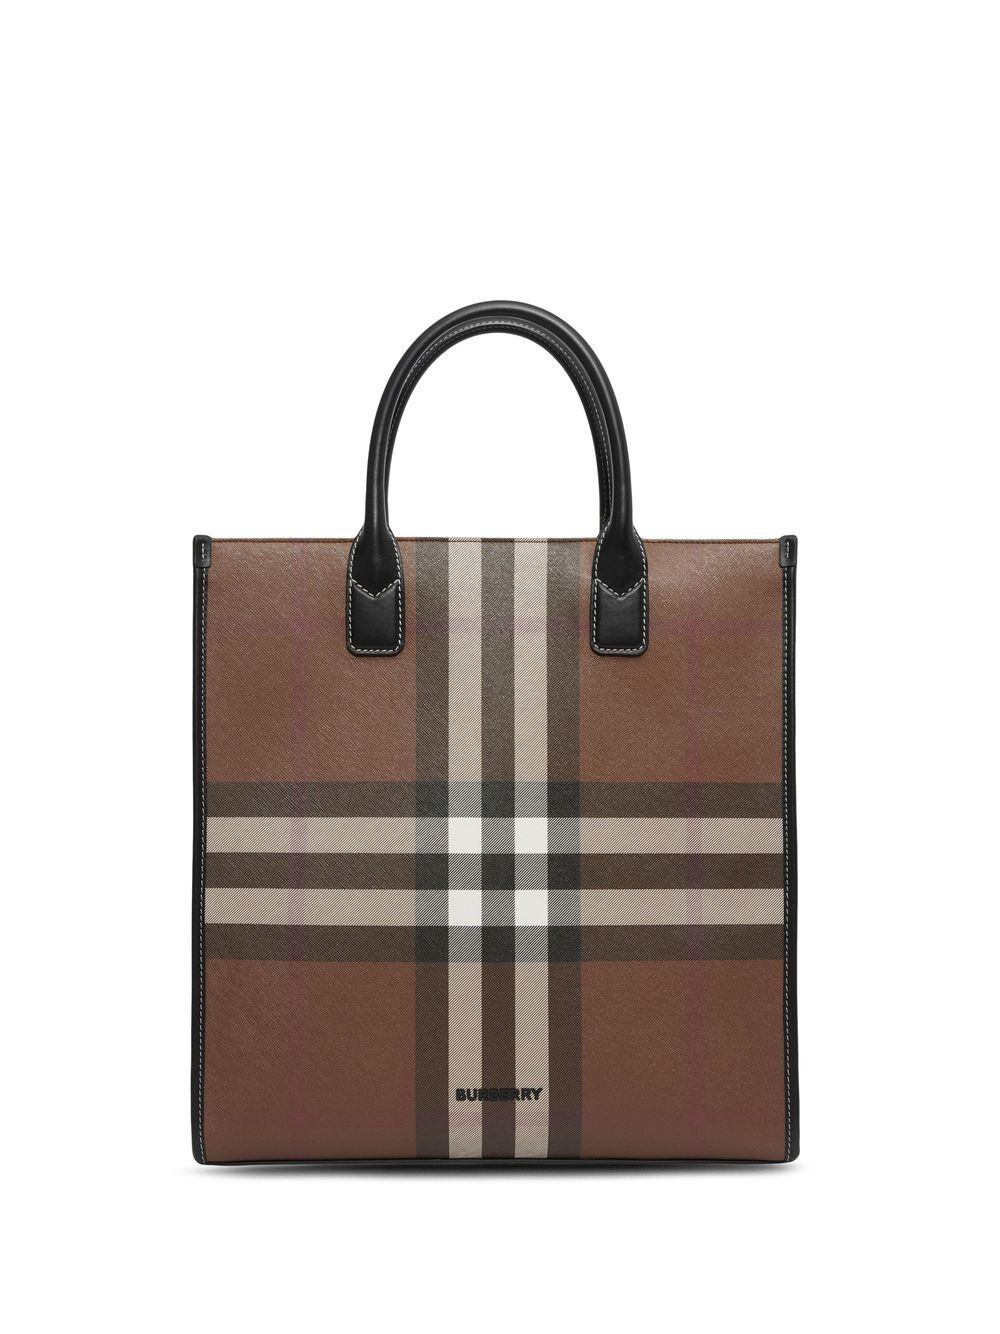 Burberry Brown Exaggerated Check Tote Handbag For Men